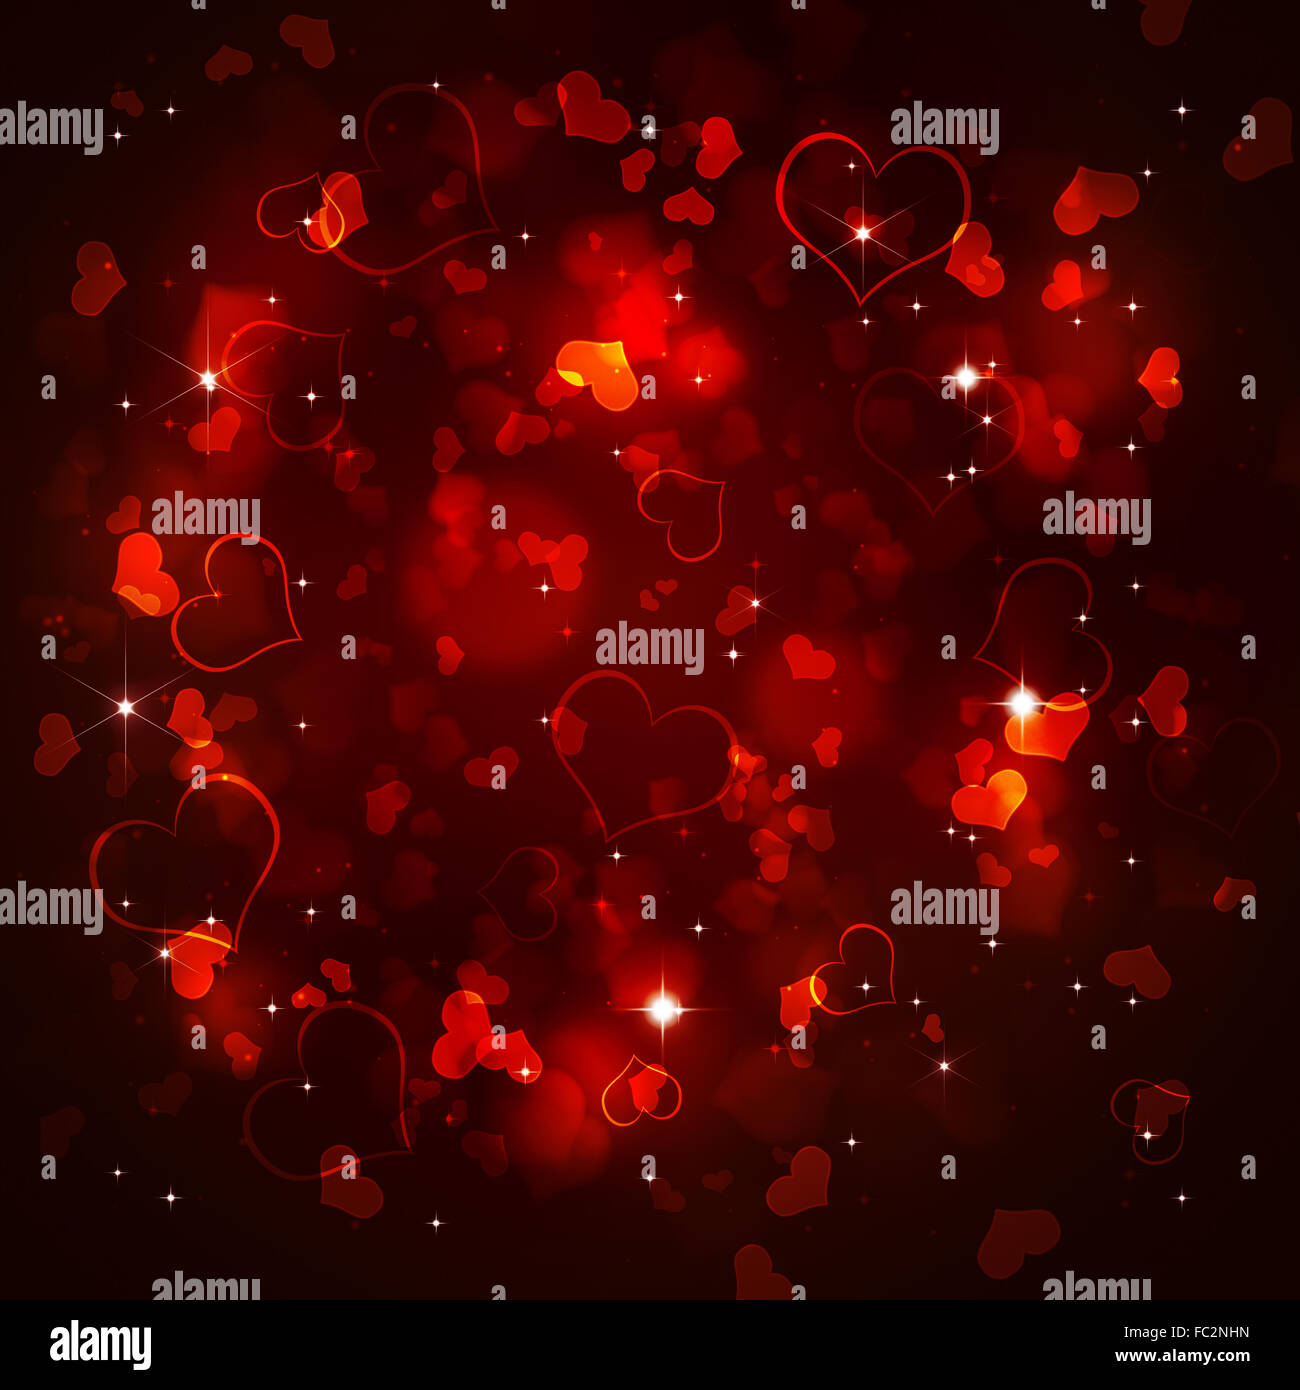 dark valentine background with blurry hearts and lights Stock Photo